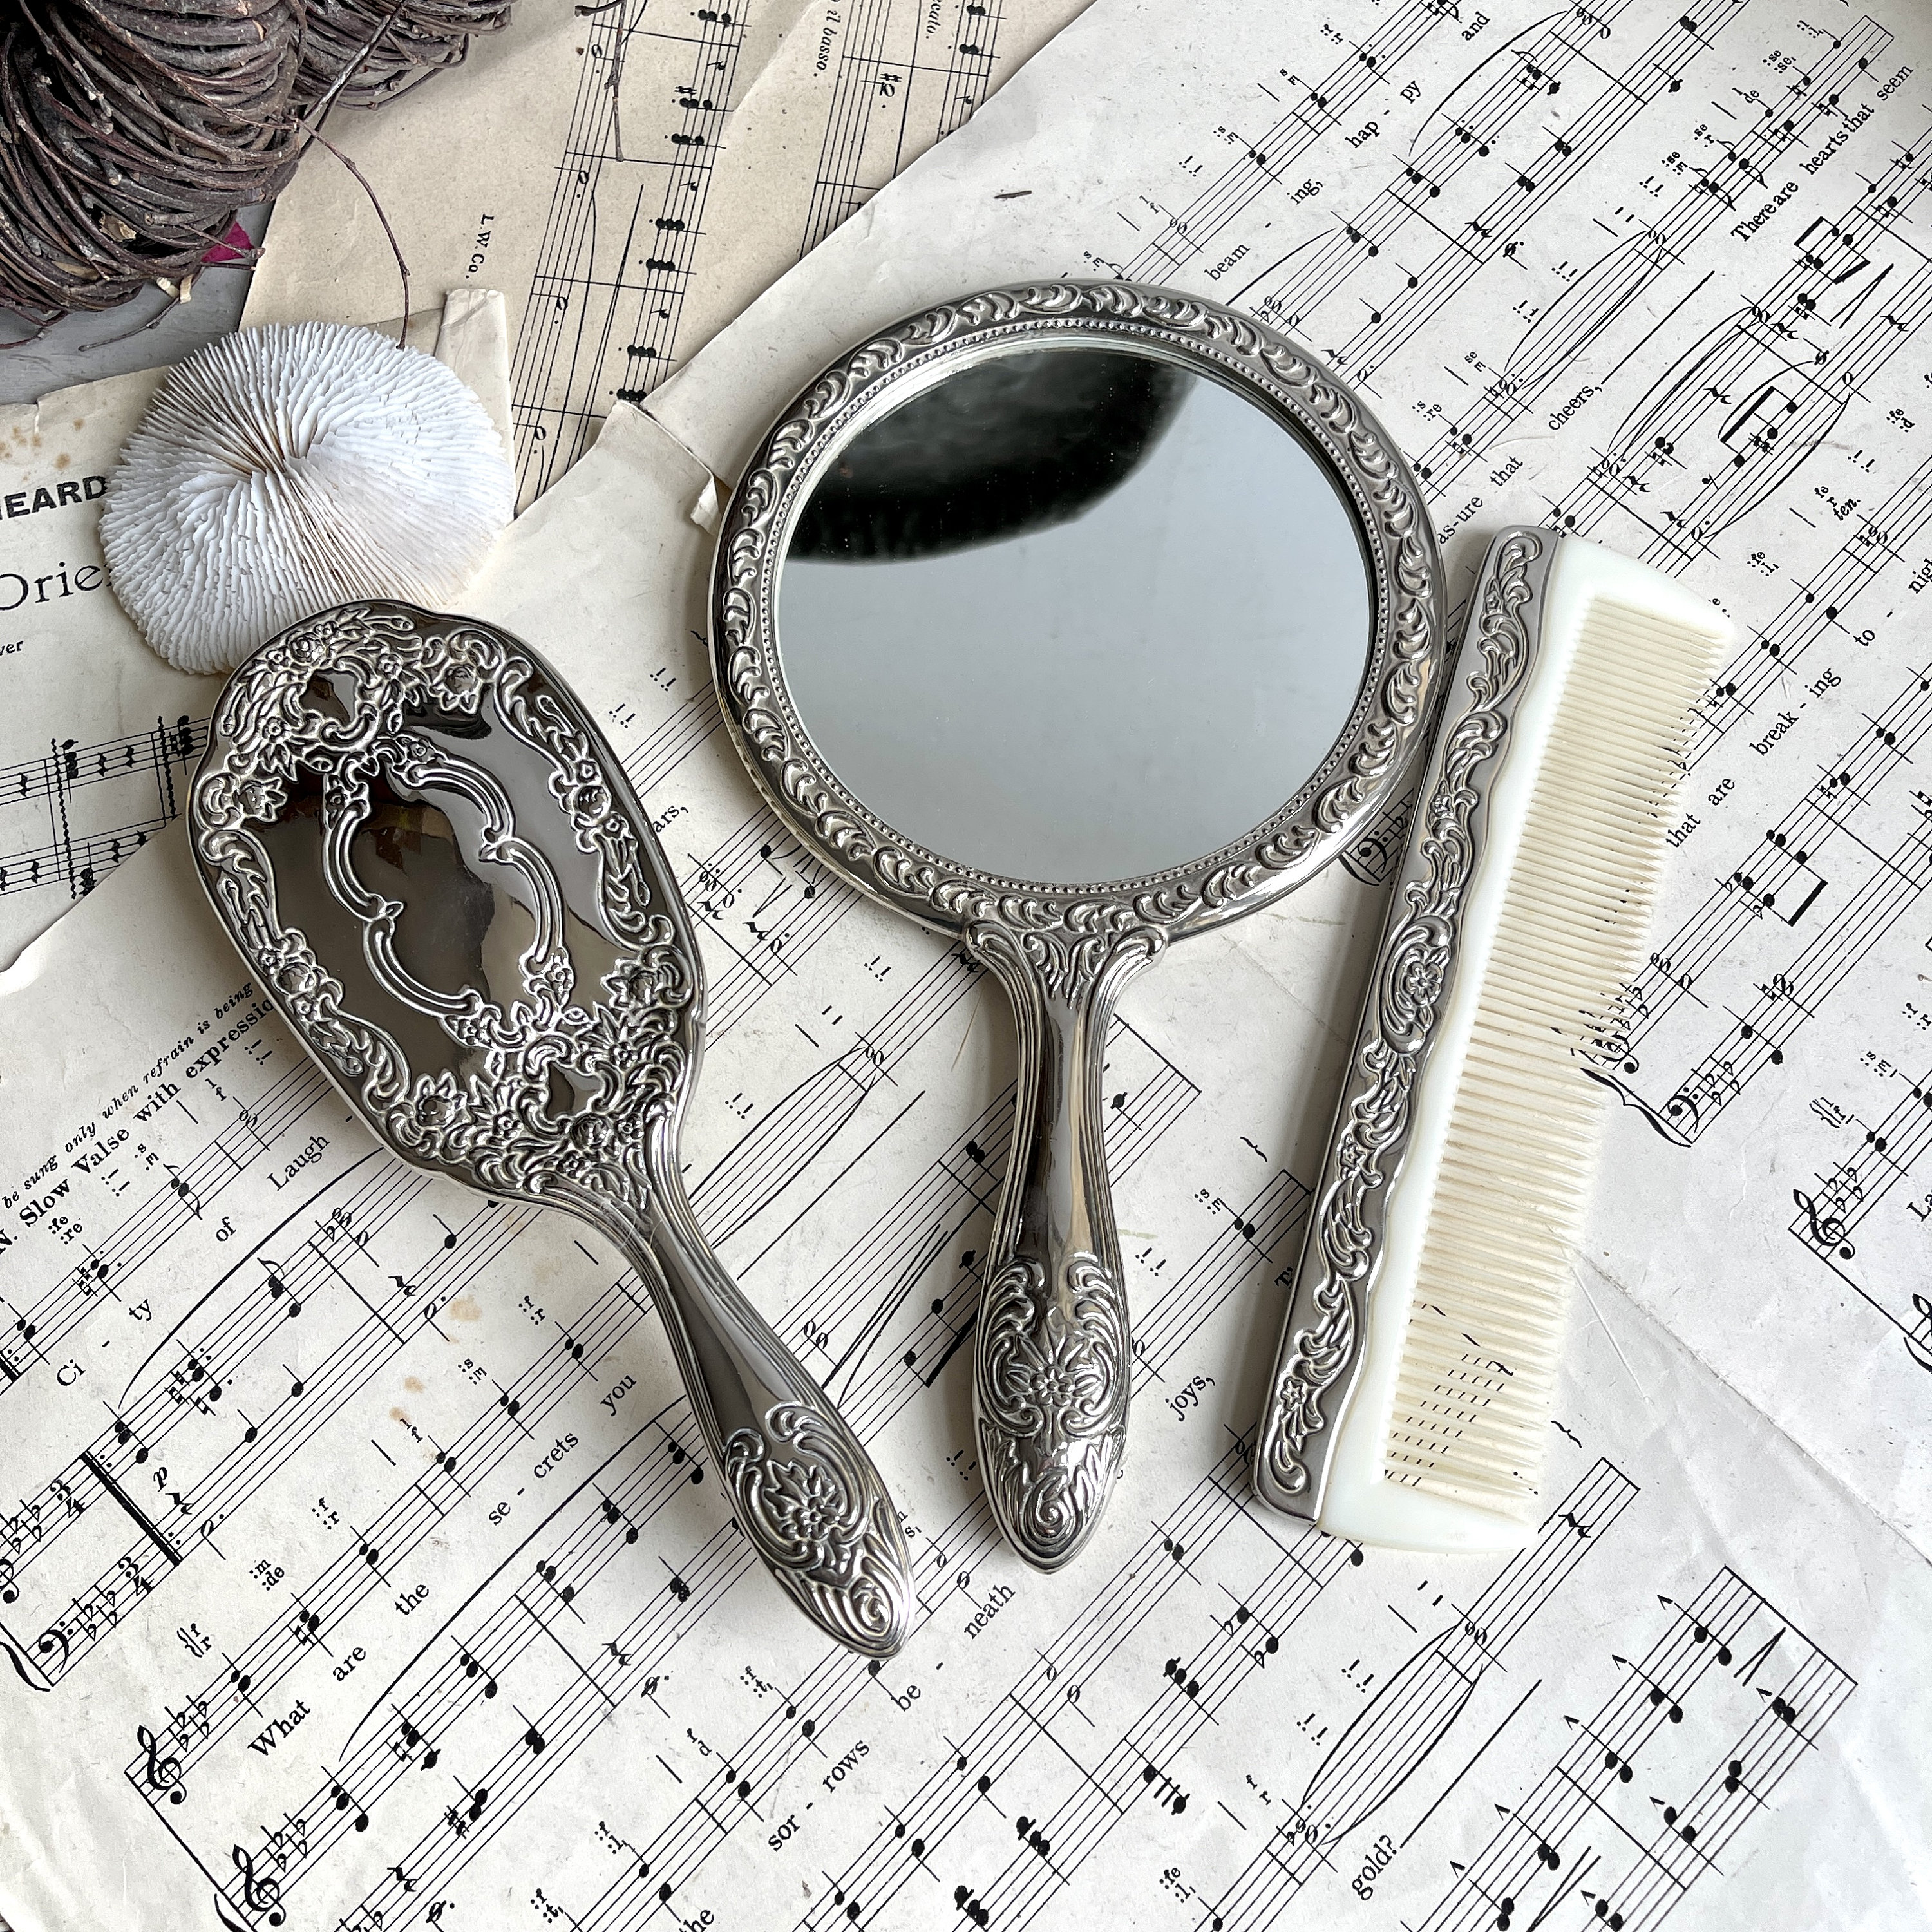 Large Handheld Magnifying Glass Gold Metal With 10cm Round Lens Vintage  Style Embossed Handle Overall Length 23.5cm / 9 1/4 